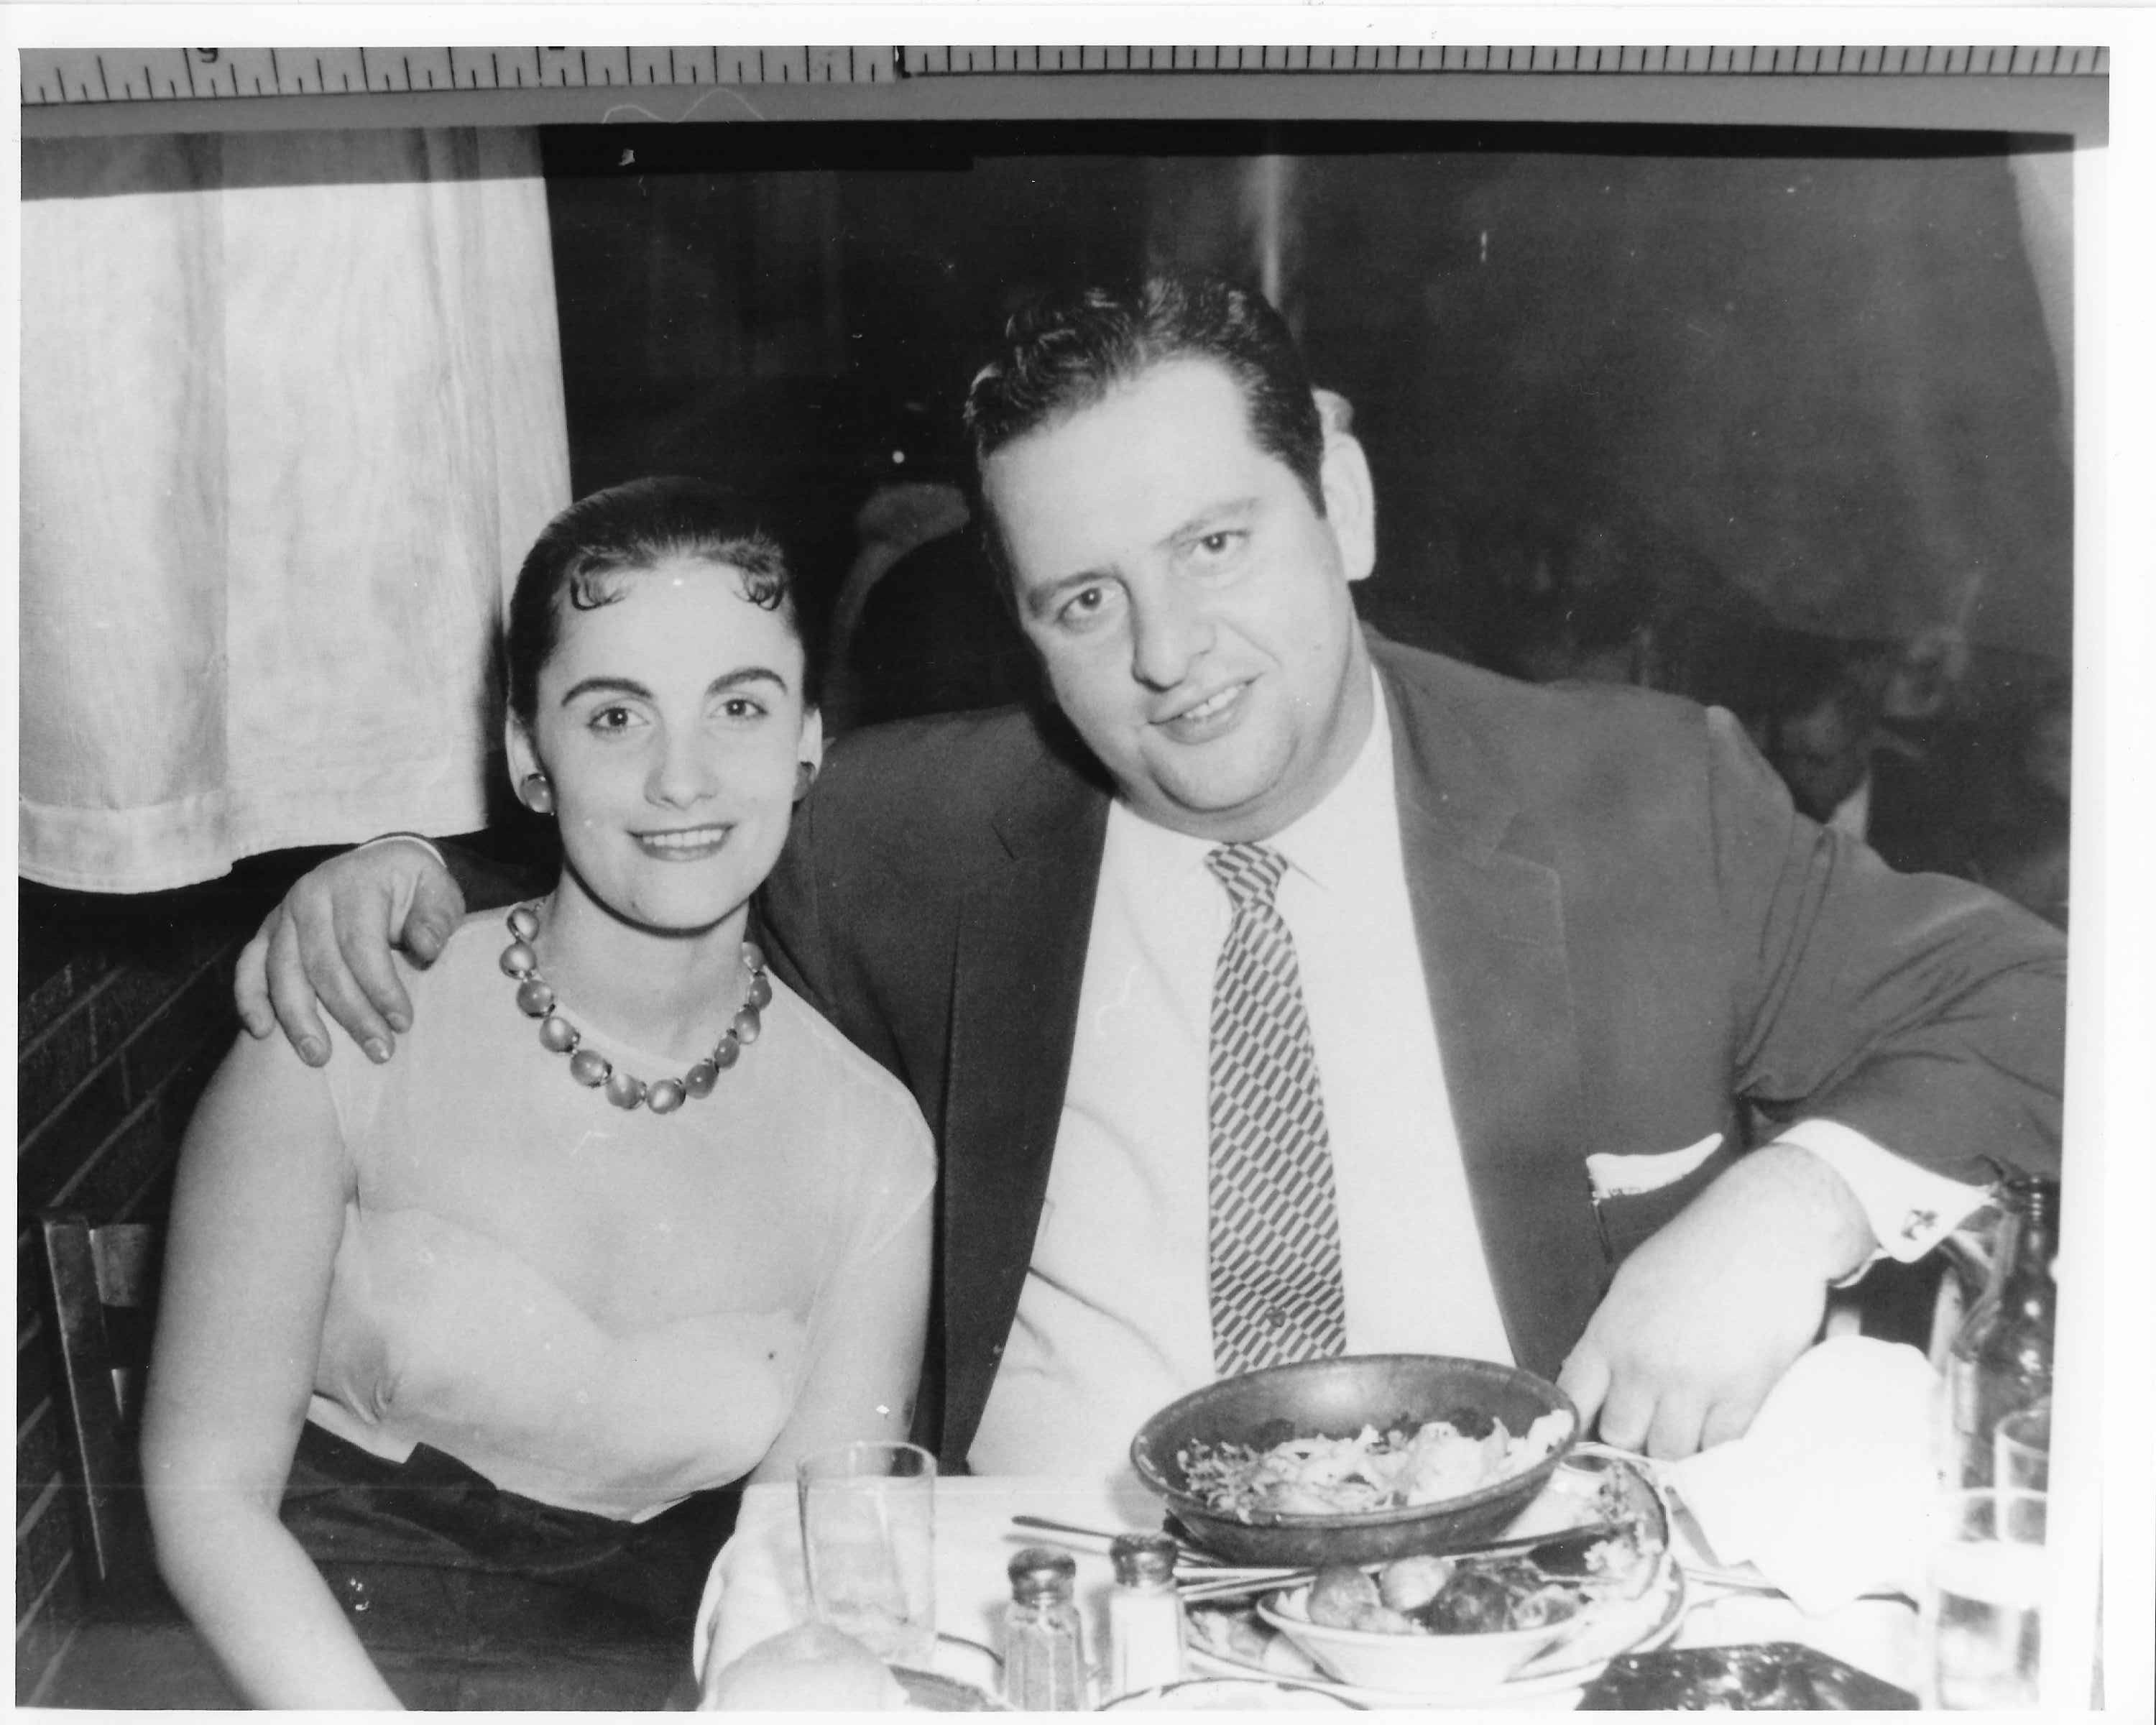 Al and Daisy Monzo in the 60's